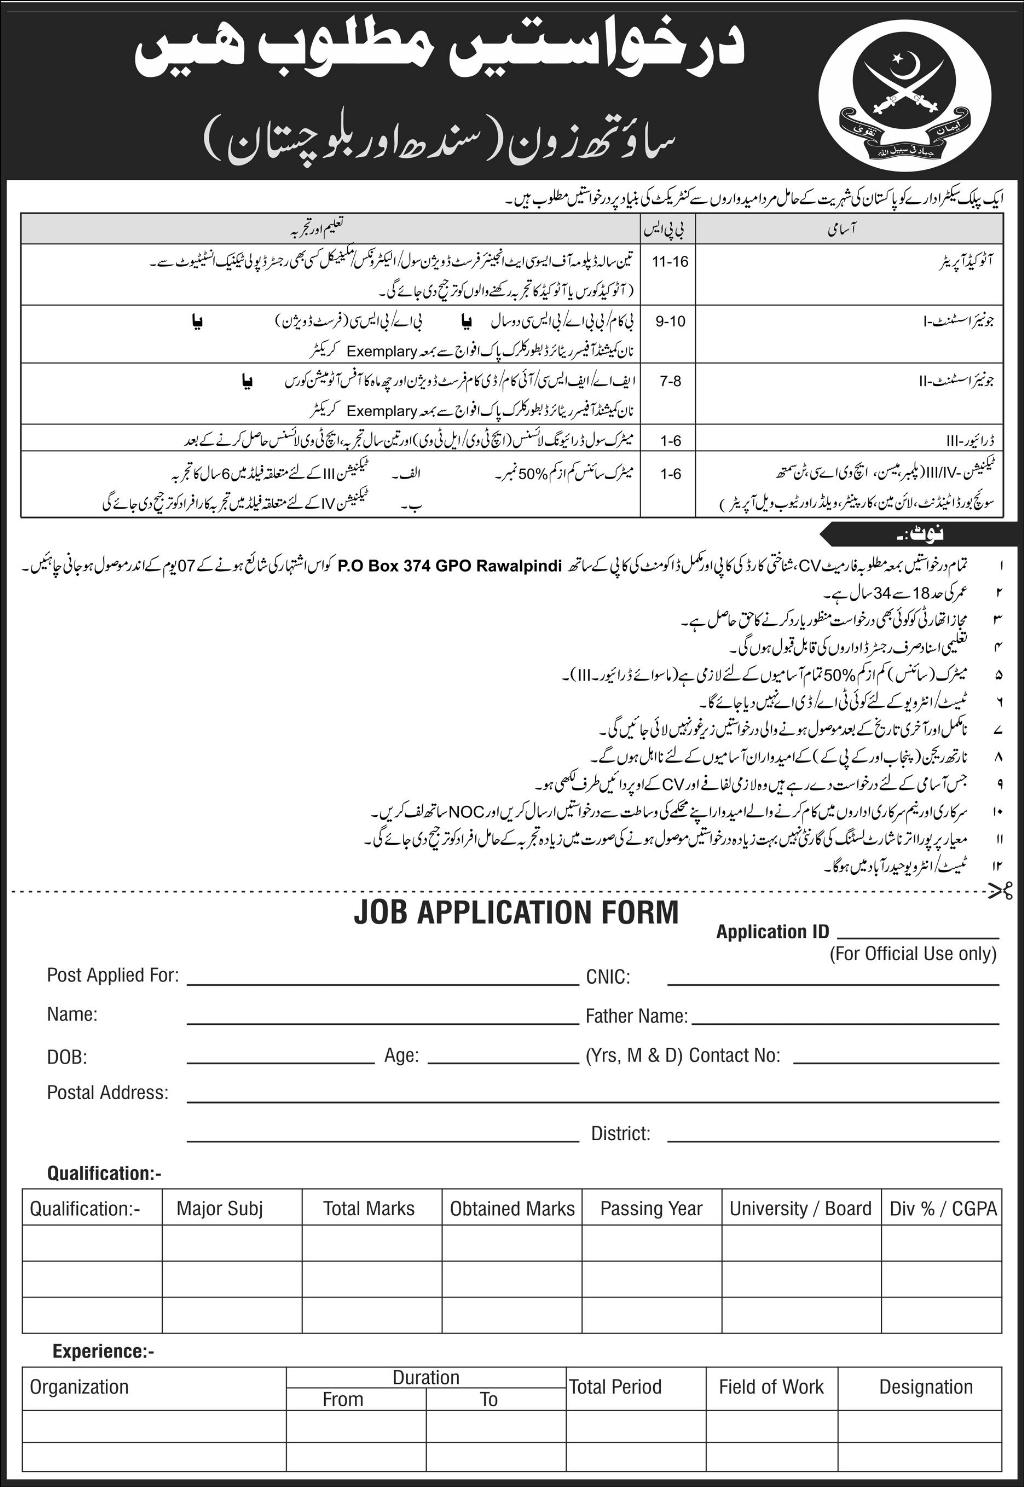 Jobs In Public Sector Organization 2018 for Auto cad Operator and others